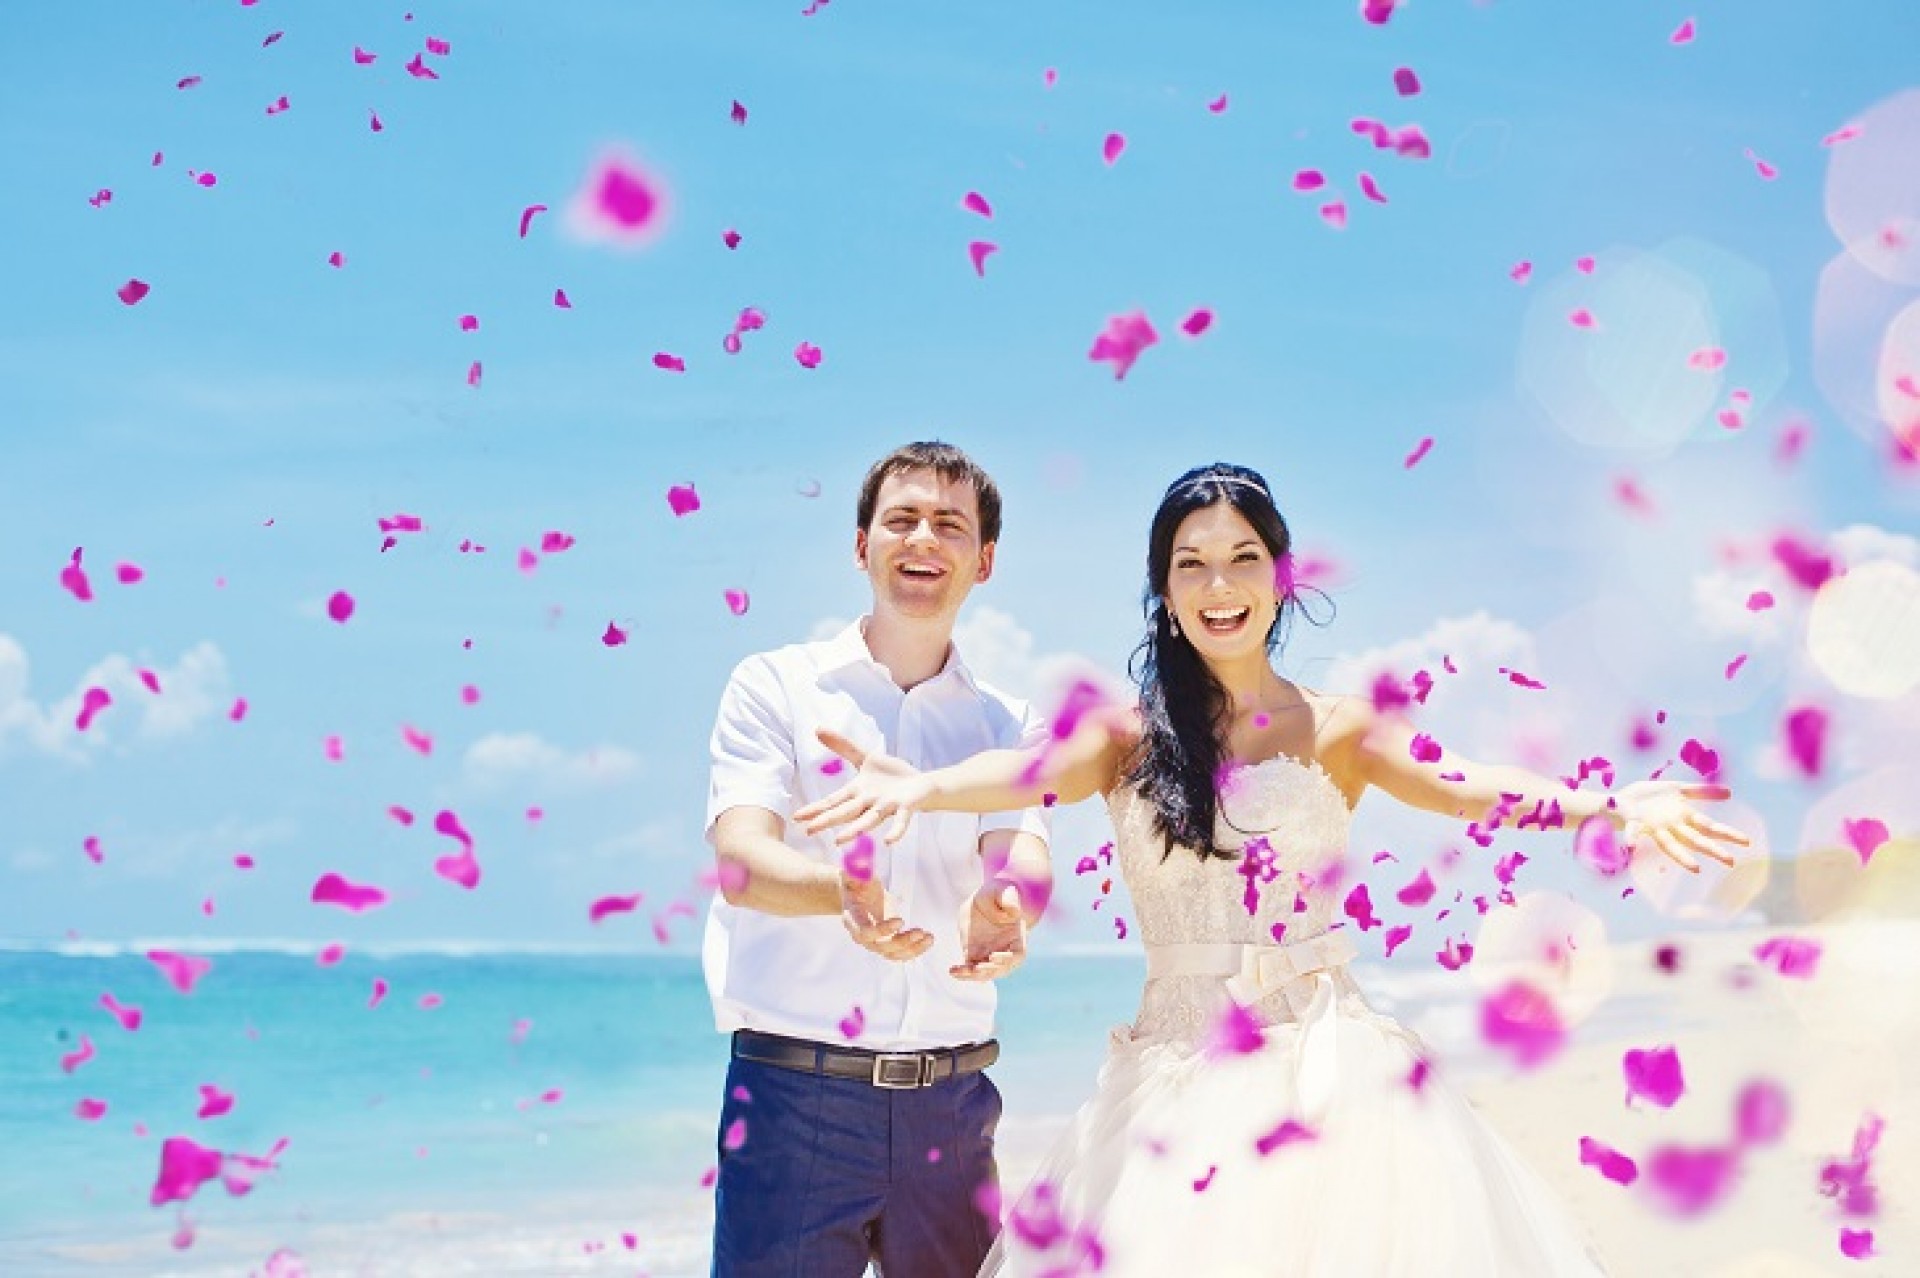 Growth of weddings abroad